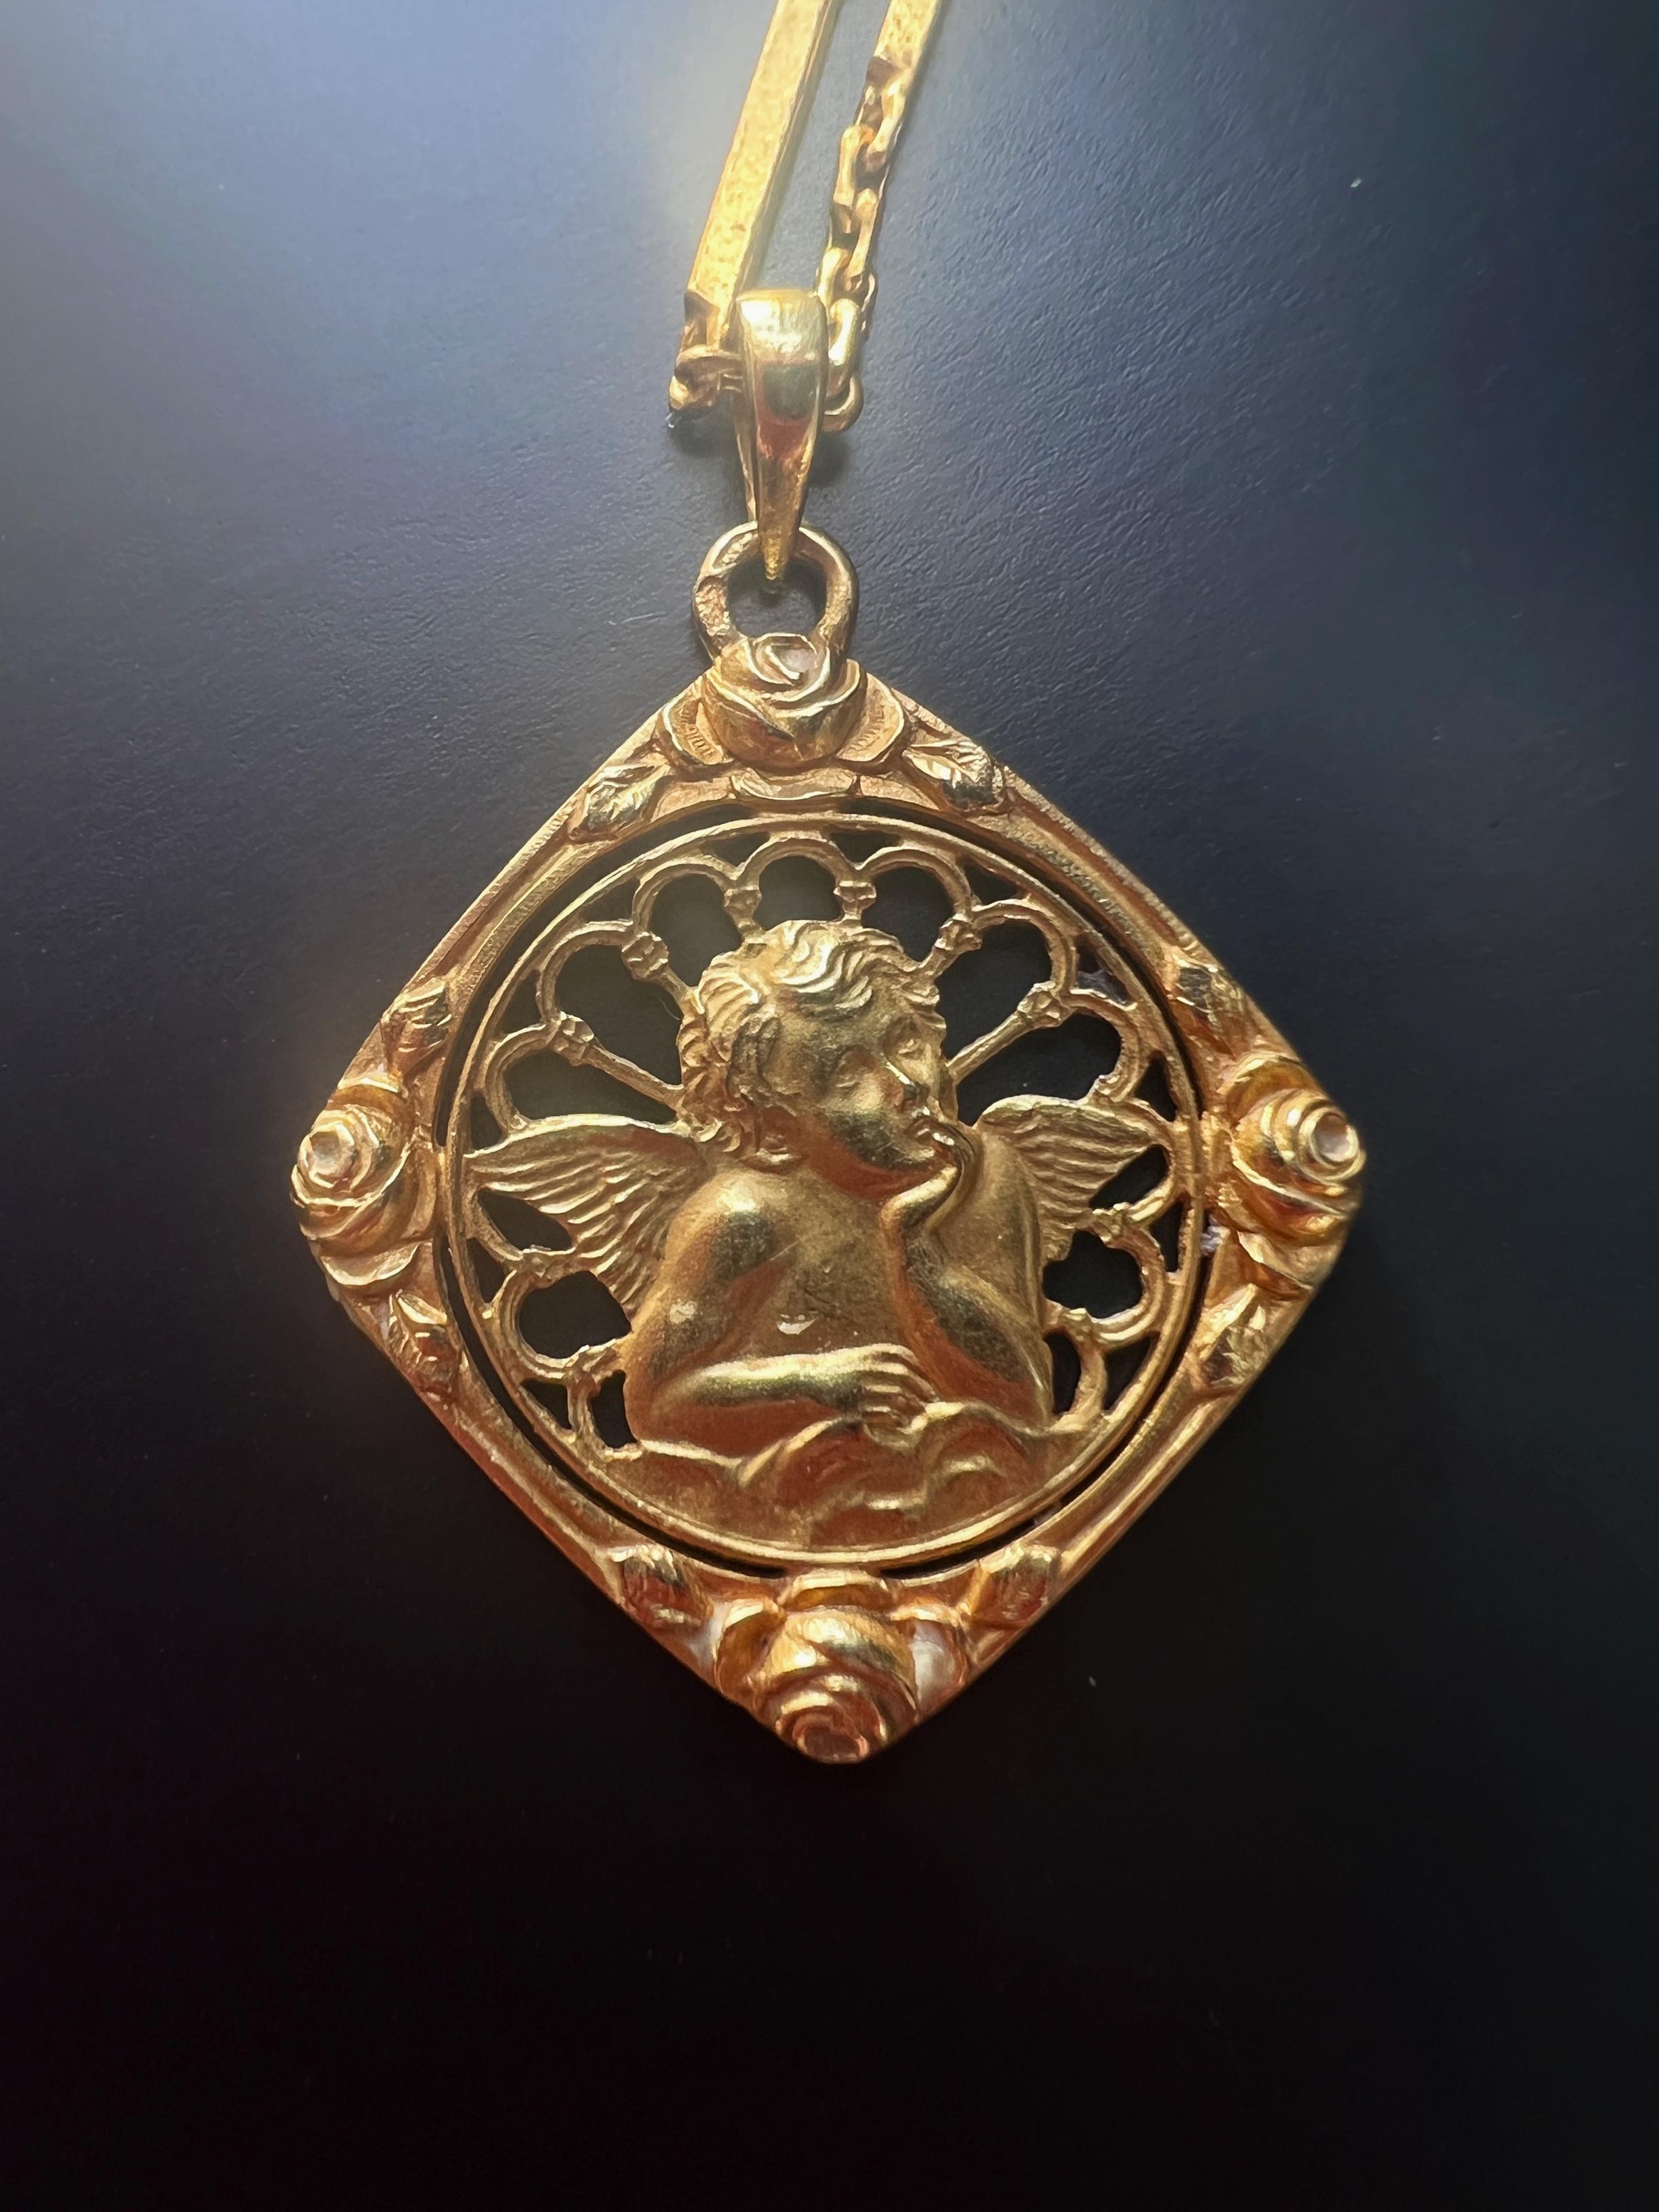 For sale a beautiful French work, 18K gold medal featuring the Angel Raphael. (“L’ange penseur de Raphael”). It is dated back to the 1930s, the Art Deco era.

Angel is the symbol of love and this medal is skilfully crafted with remarkable details: